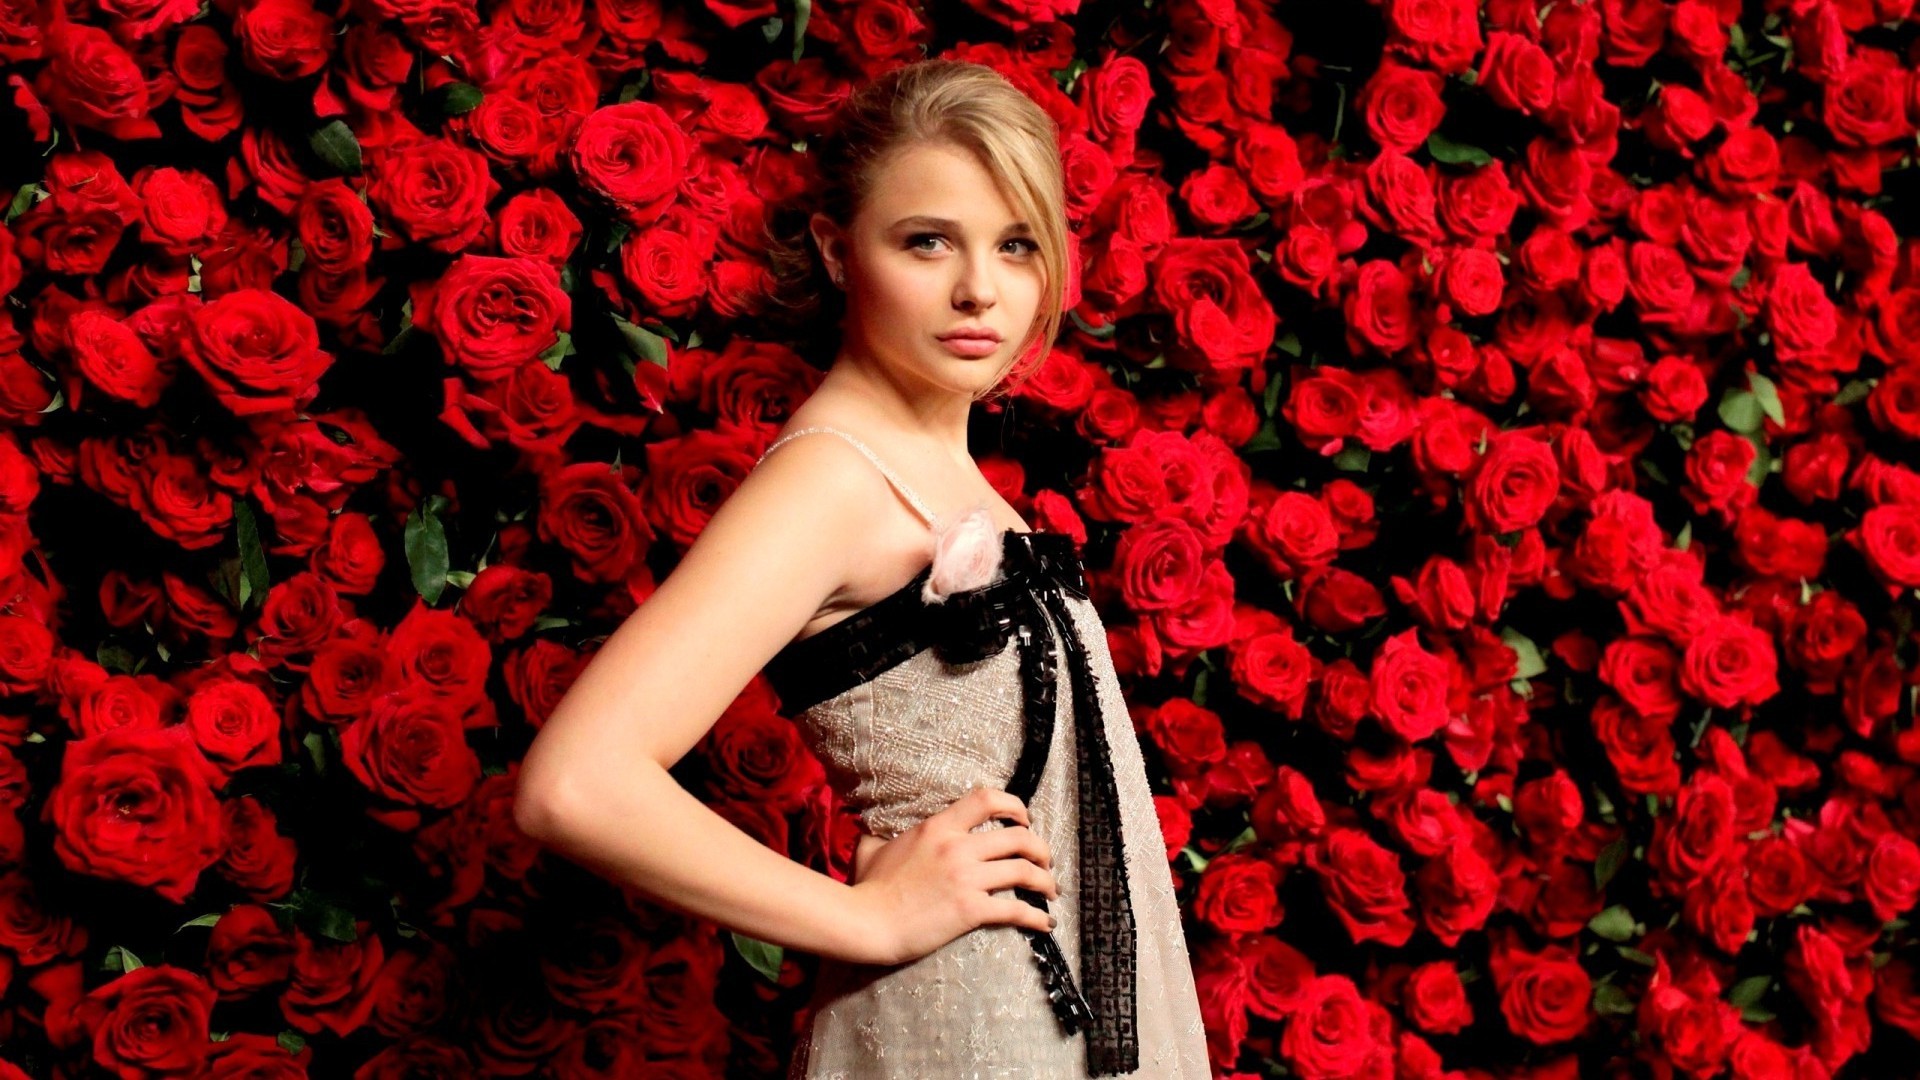 People 1920x1080 Chloë Grace Moretz blonde women actress celebrity flowers rose plants dress standing red flowers looking at viewer hands on hips